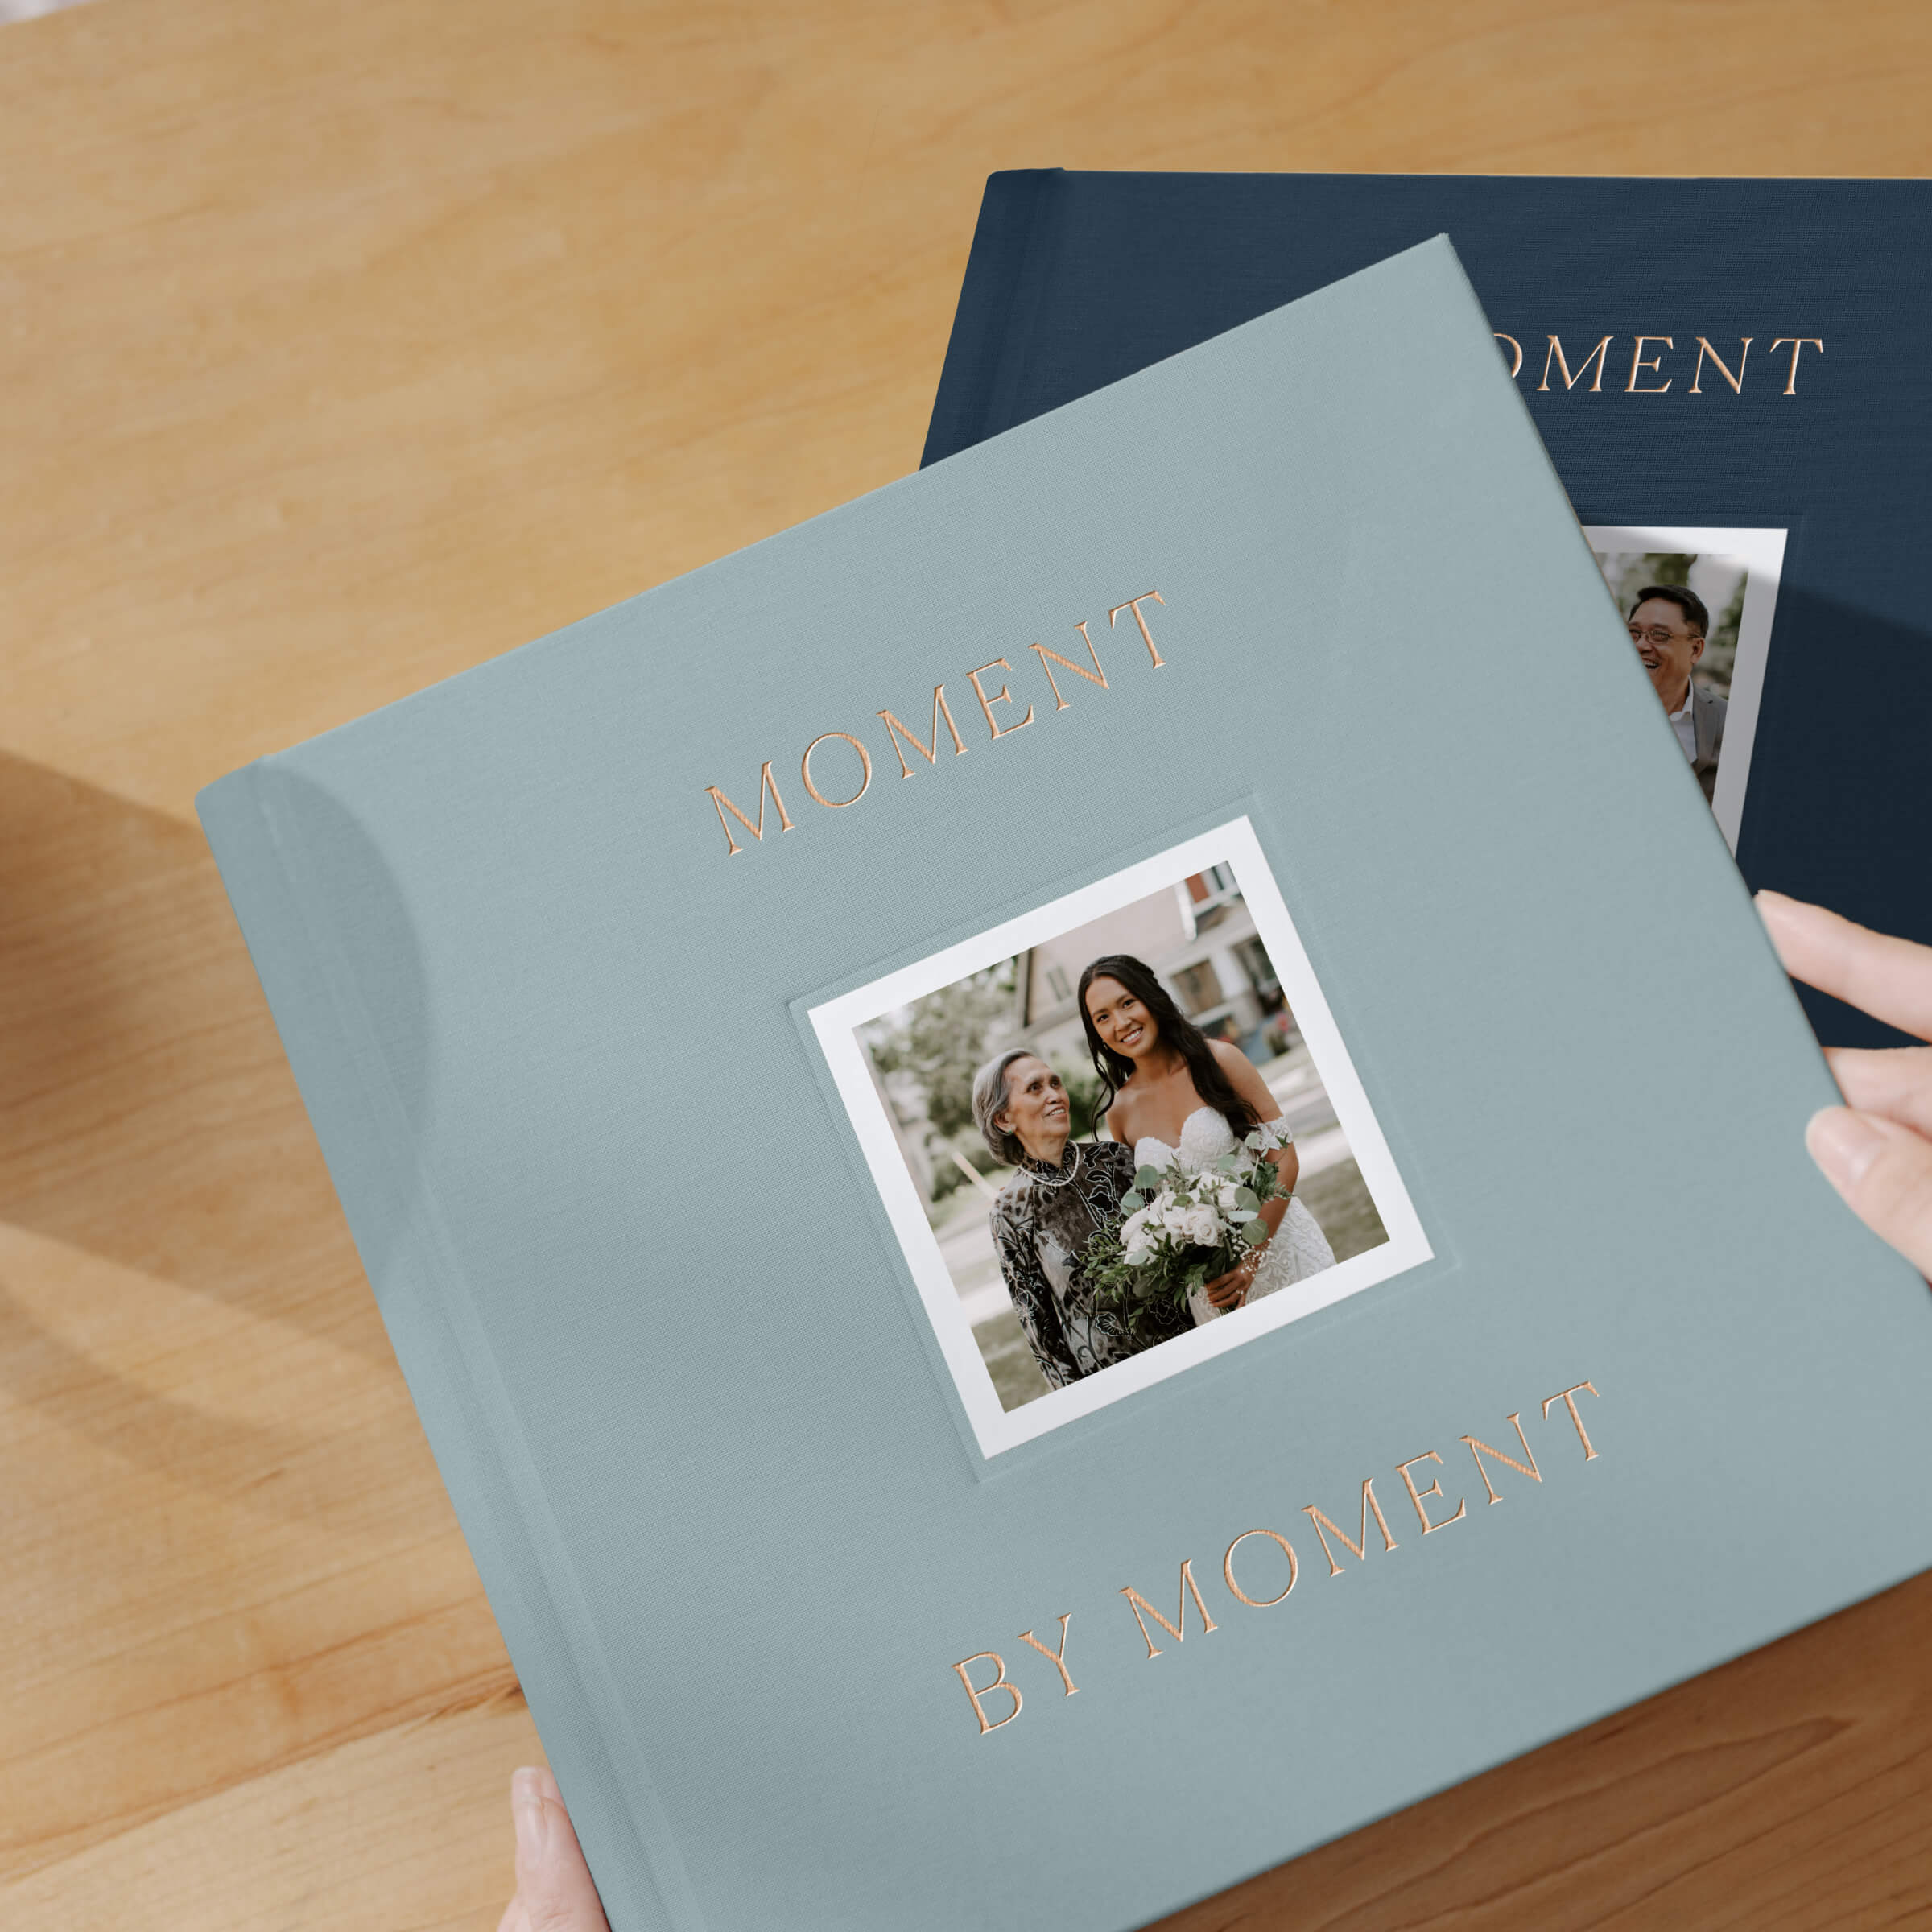 Multiple wedding photo books in different colors